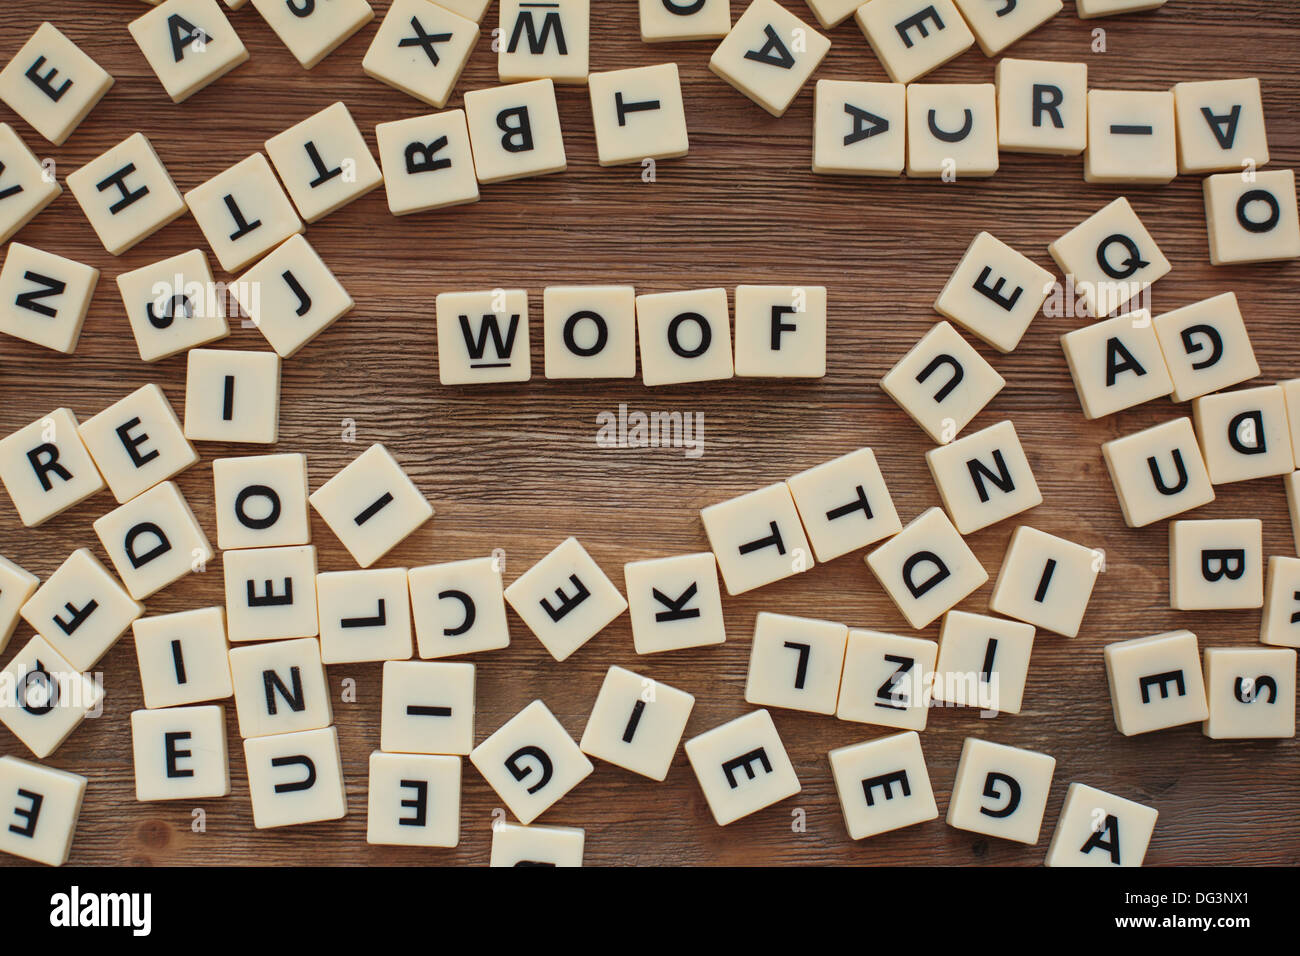 Plastic letters from a childrens' spelling game on a wooden table spell 'Woof' Stock Photo